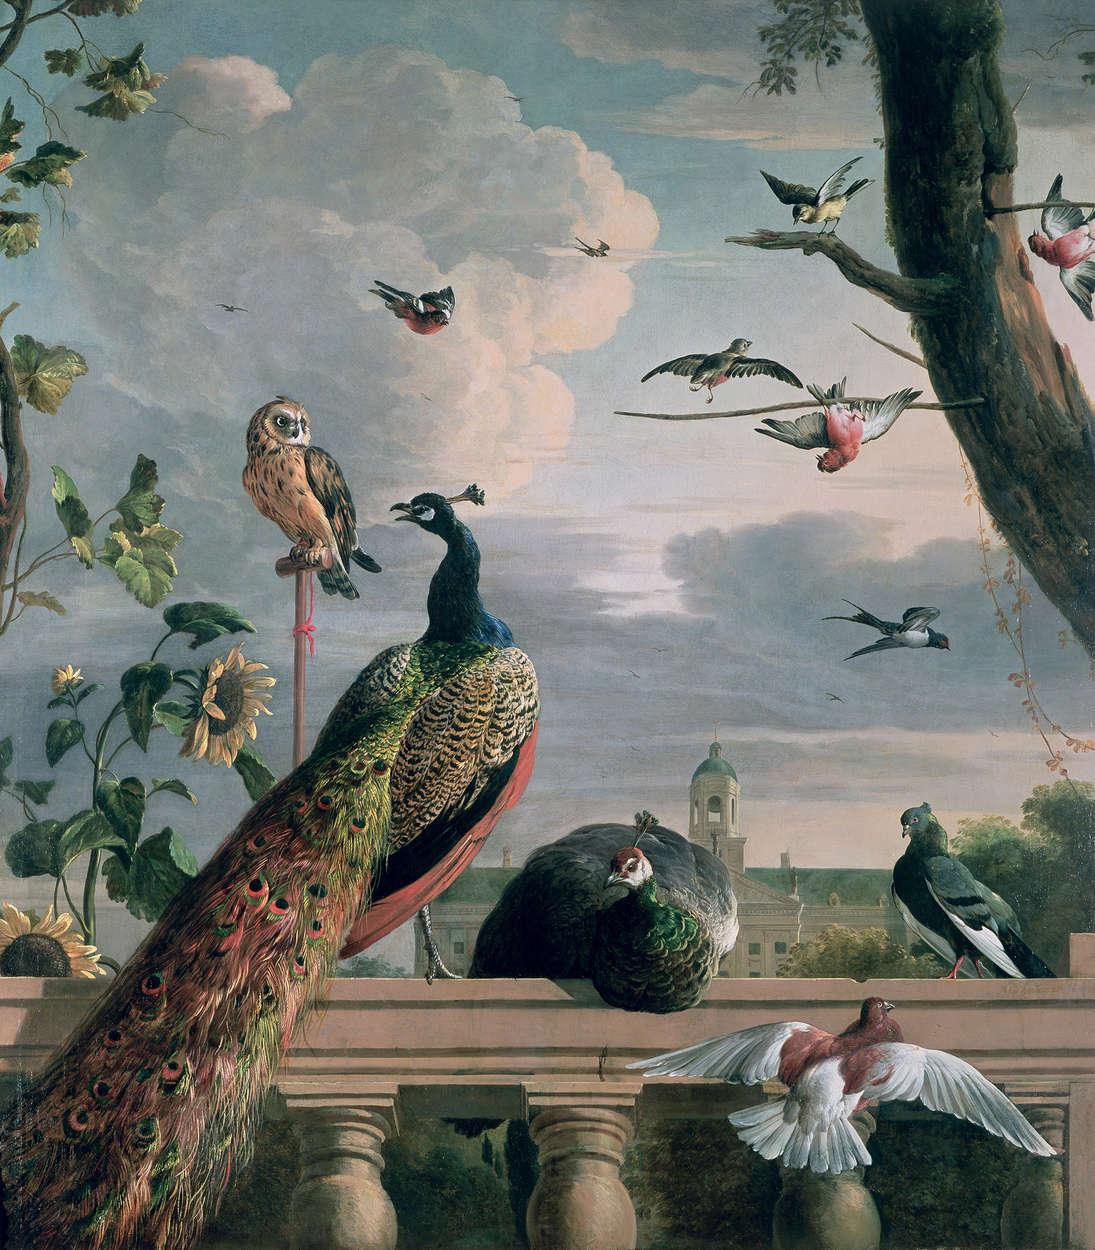             Photo wallpaper "Amsterdam Palace with exotic birds" by Melchoir de Hondecoeter
        